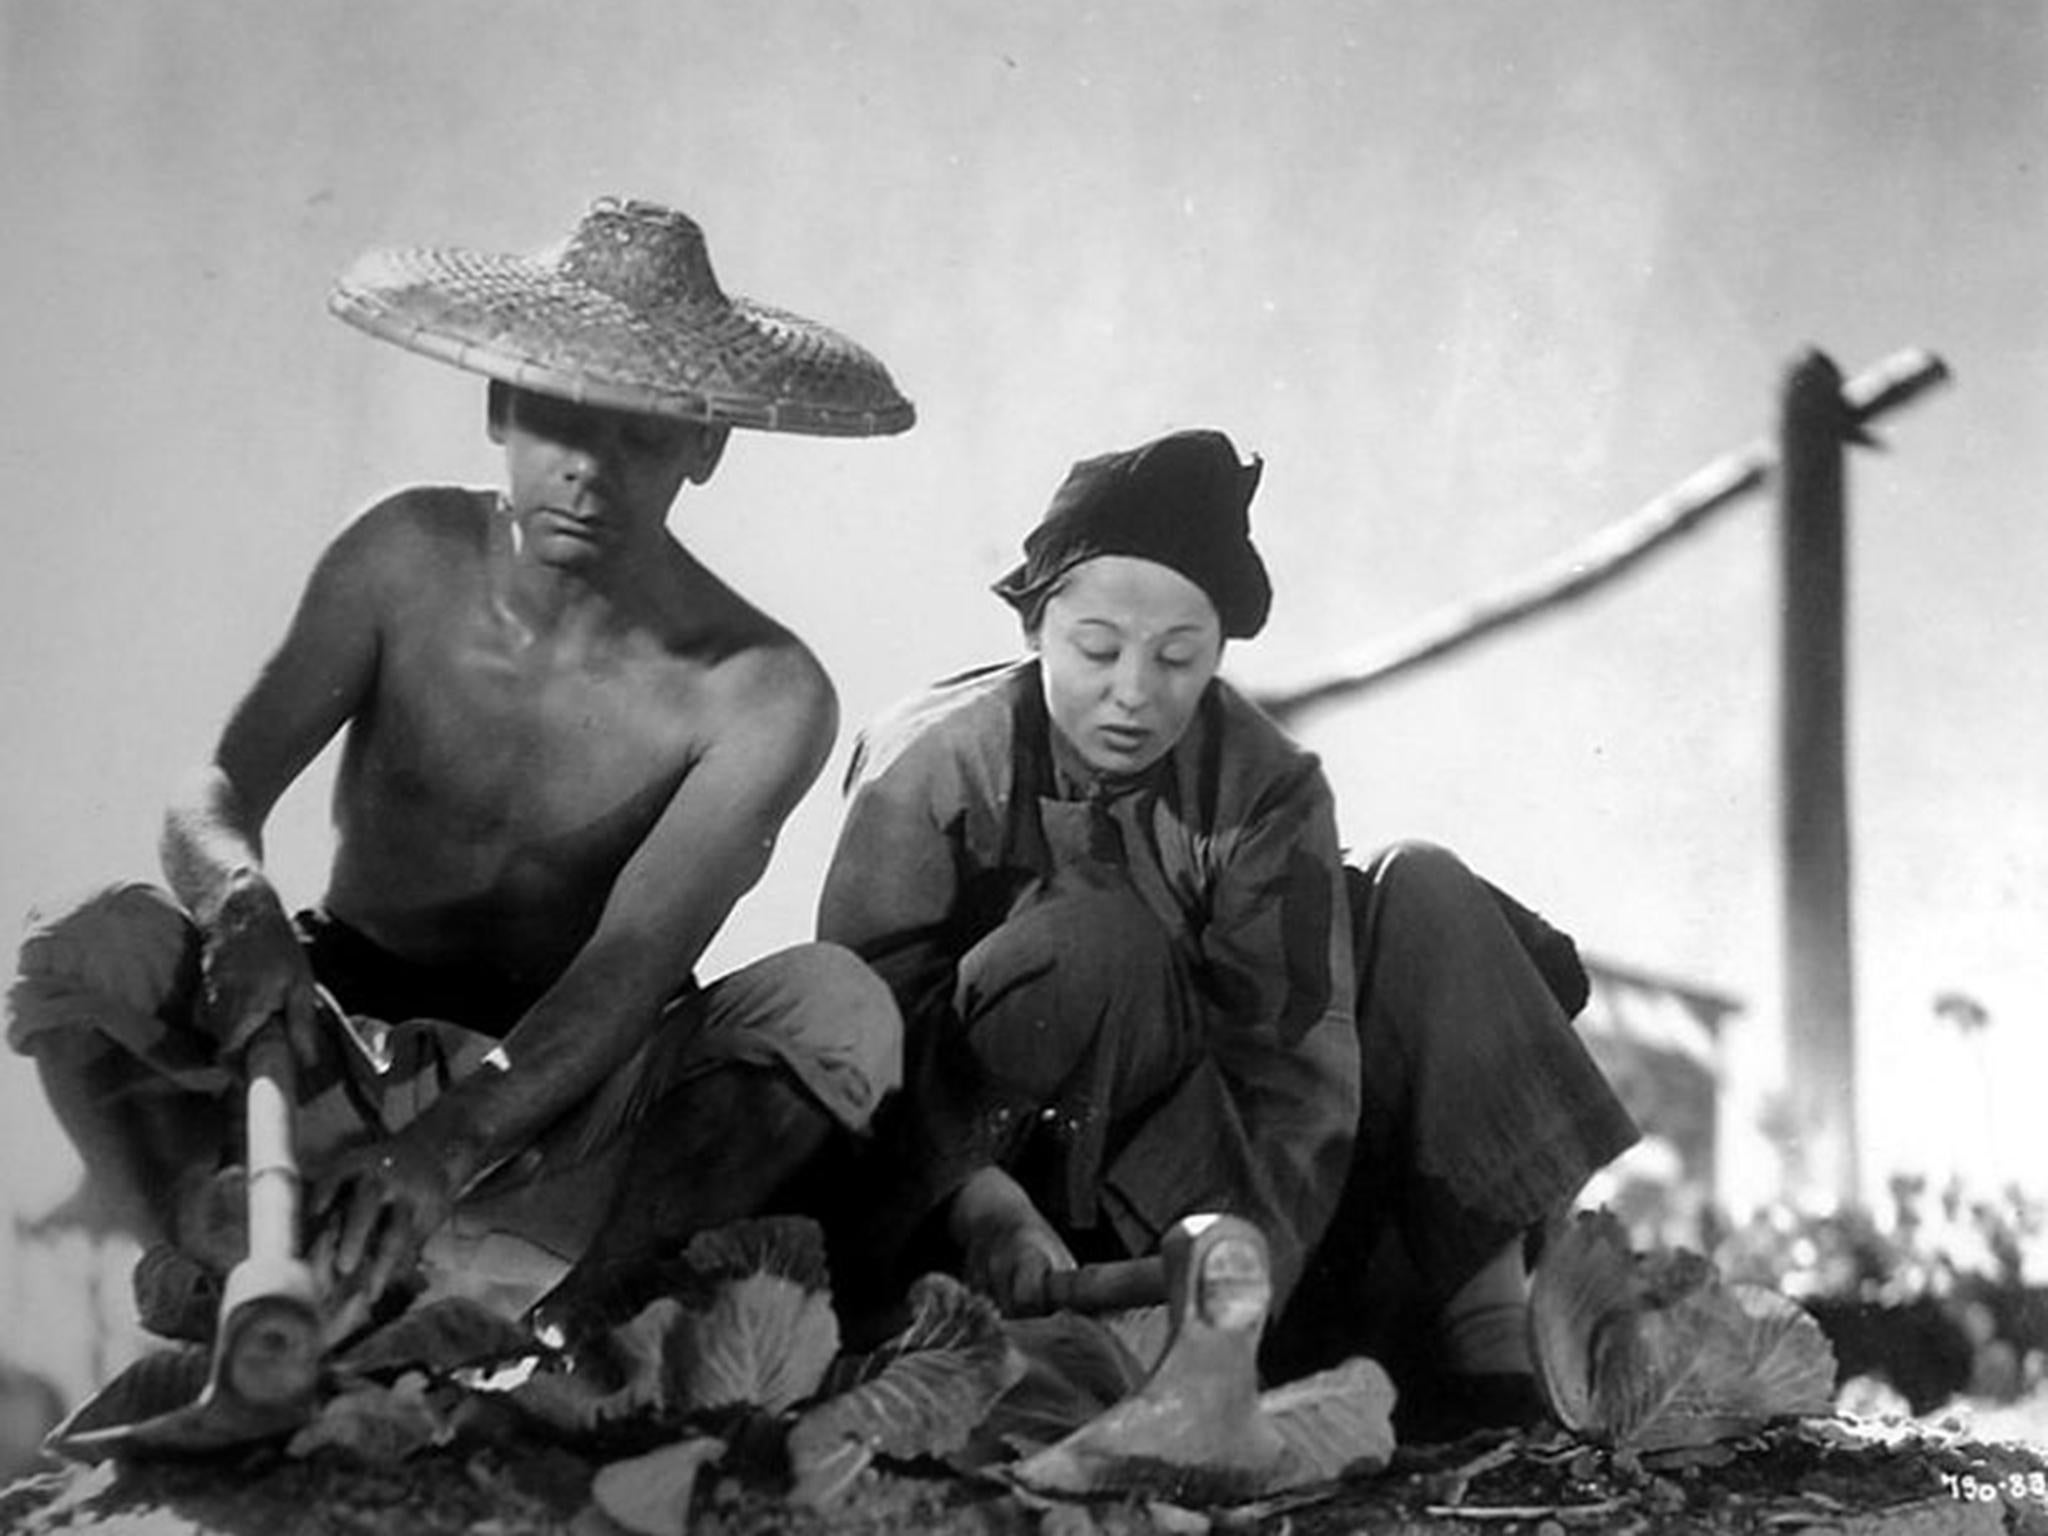 &#13;
Paul Muni and Luise Rainer in The Good Earth (1937)&#13;